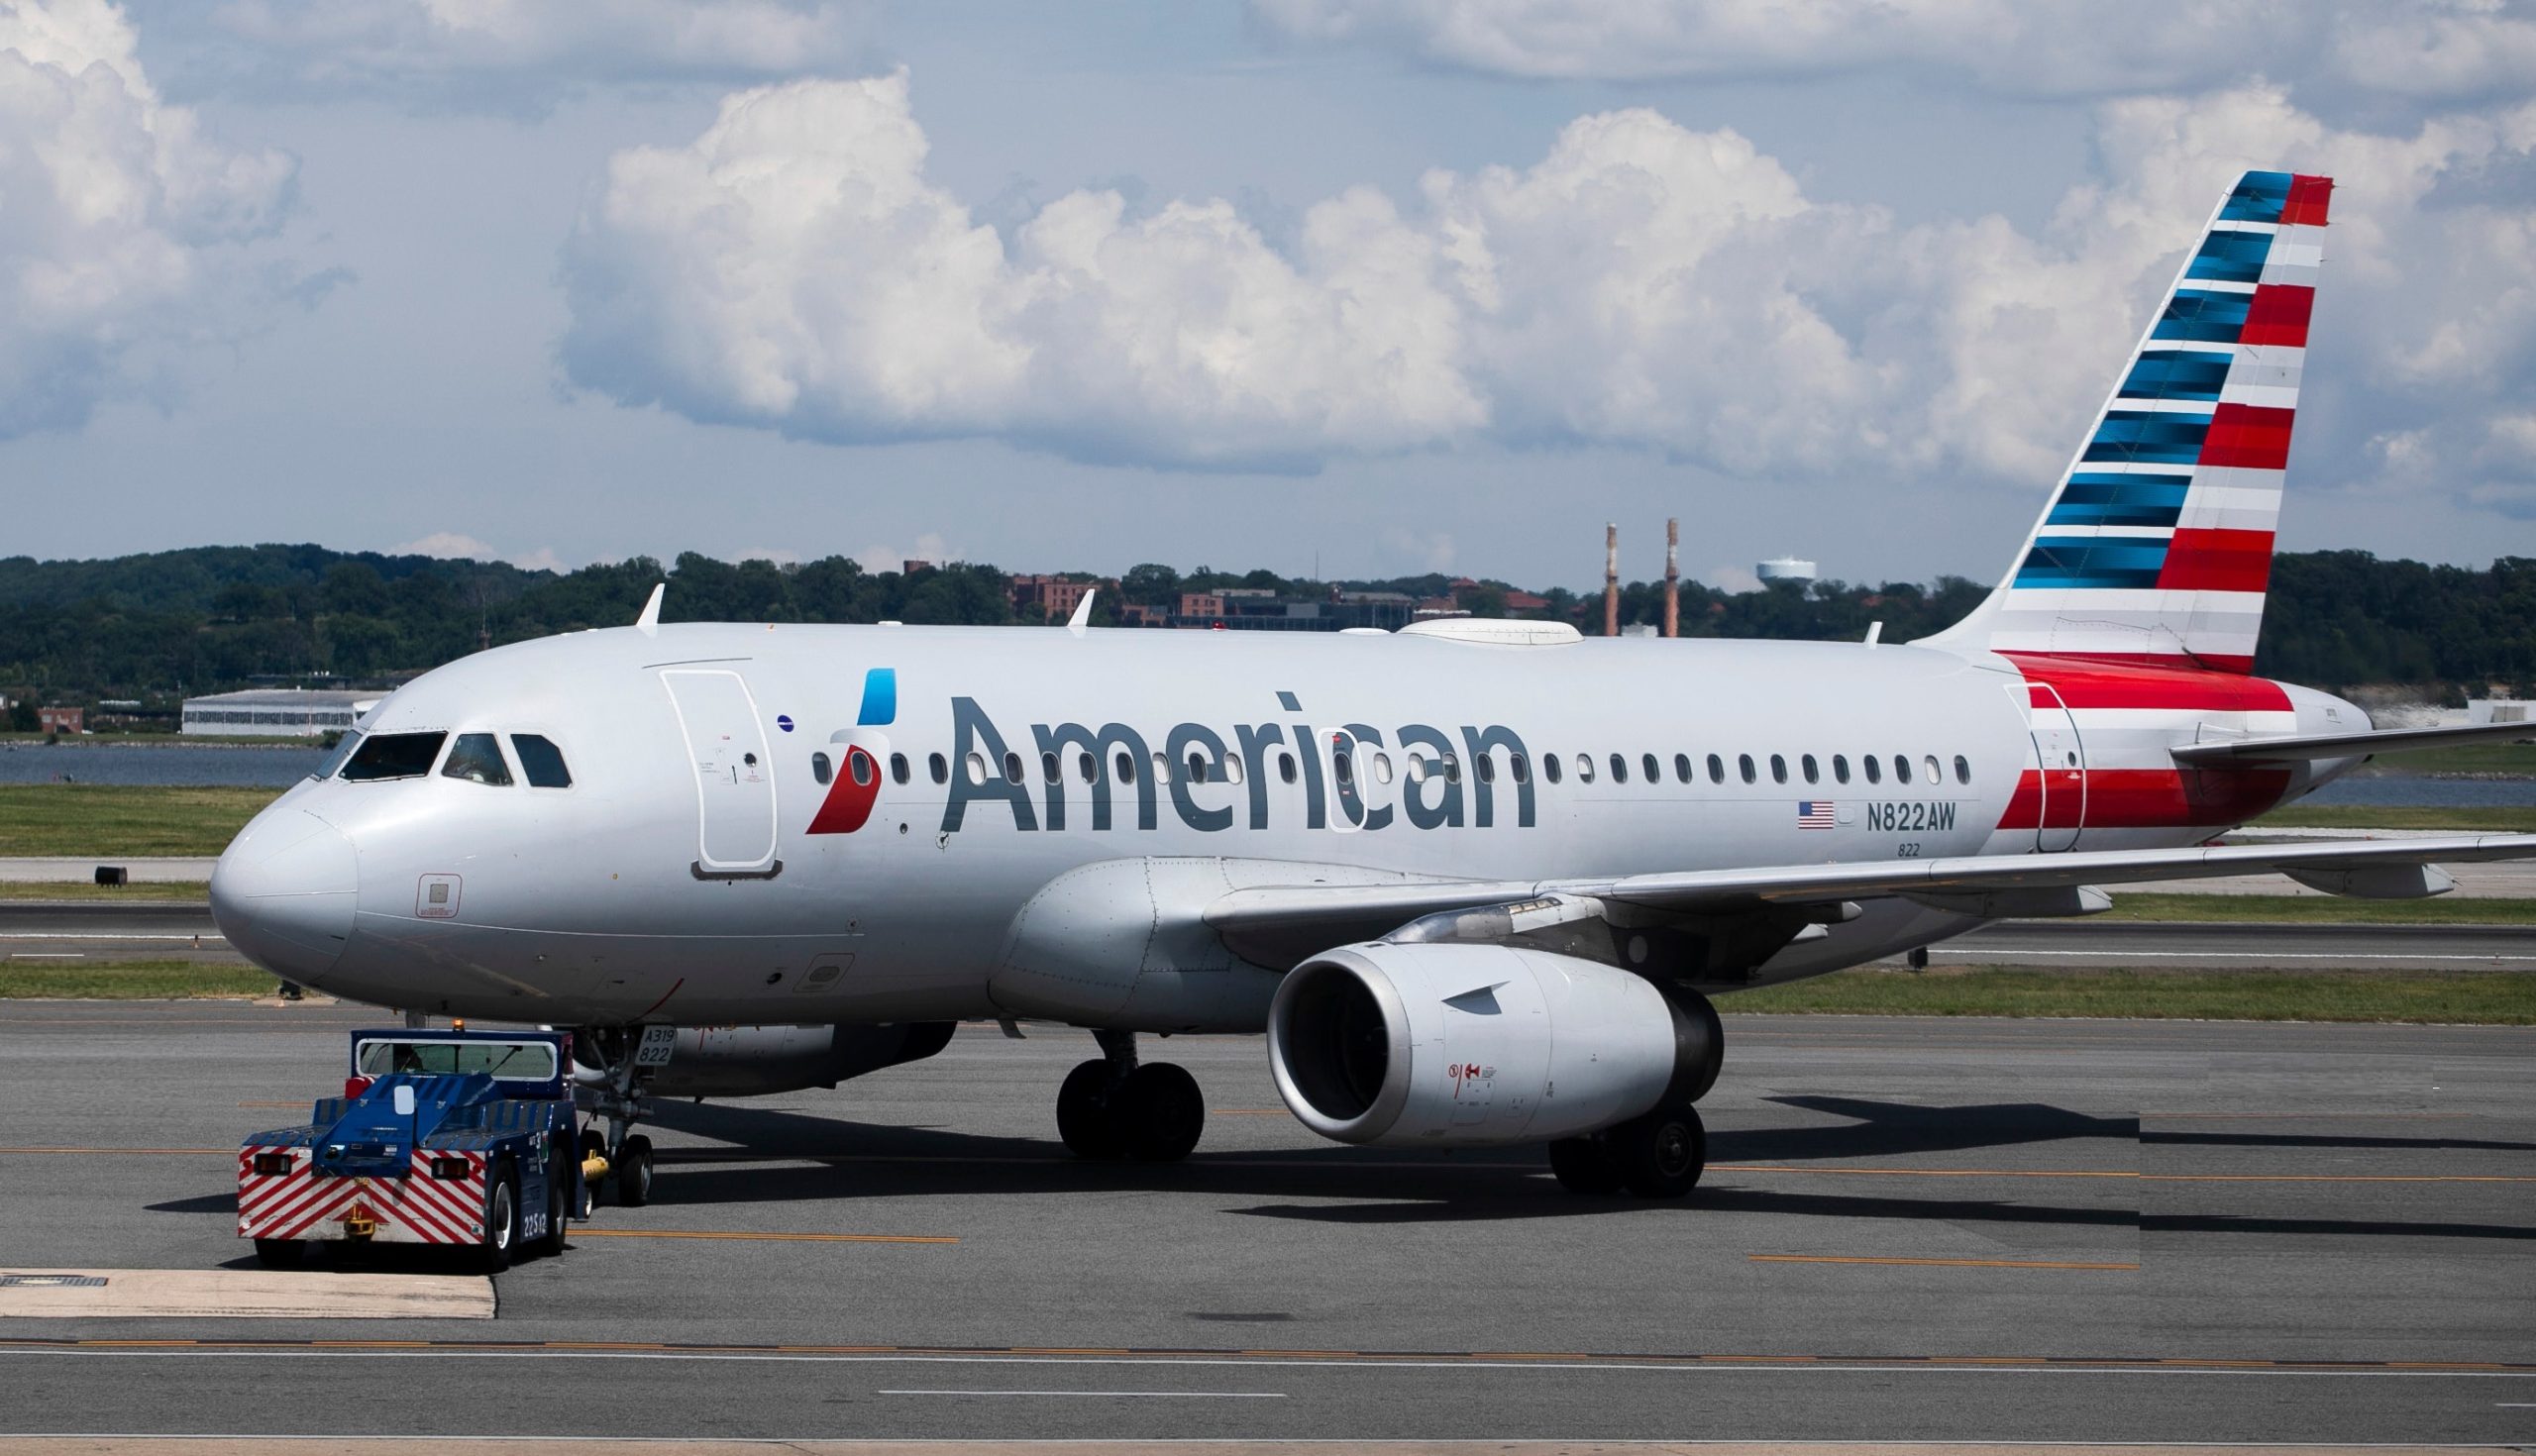 American Airlines AA - Flights, Reviews & Cancellation Policy - KAYAK